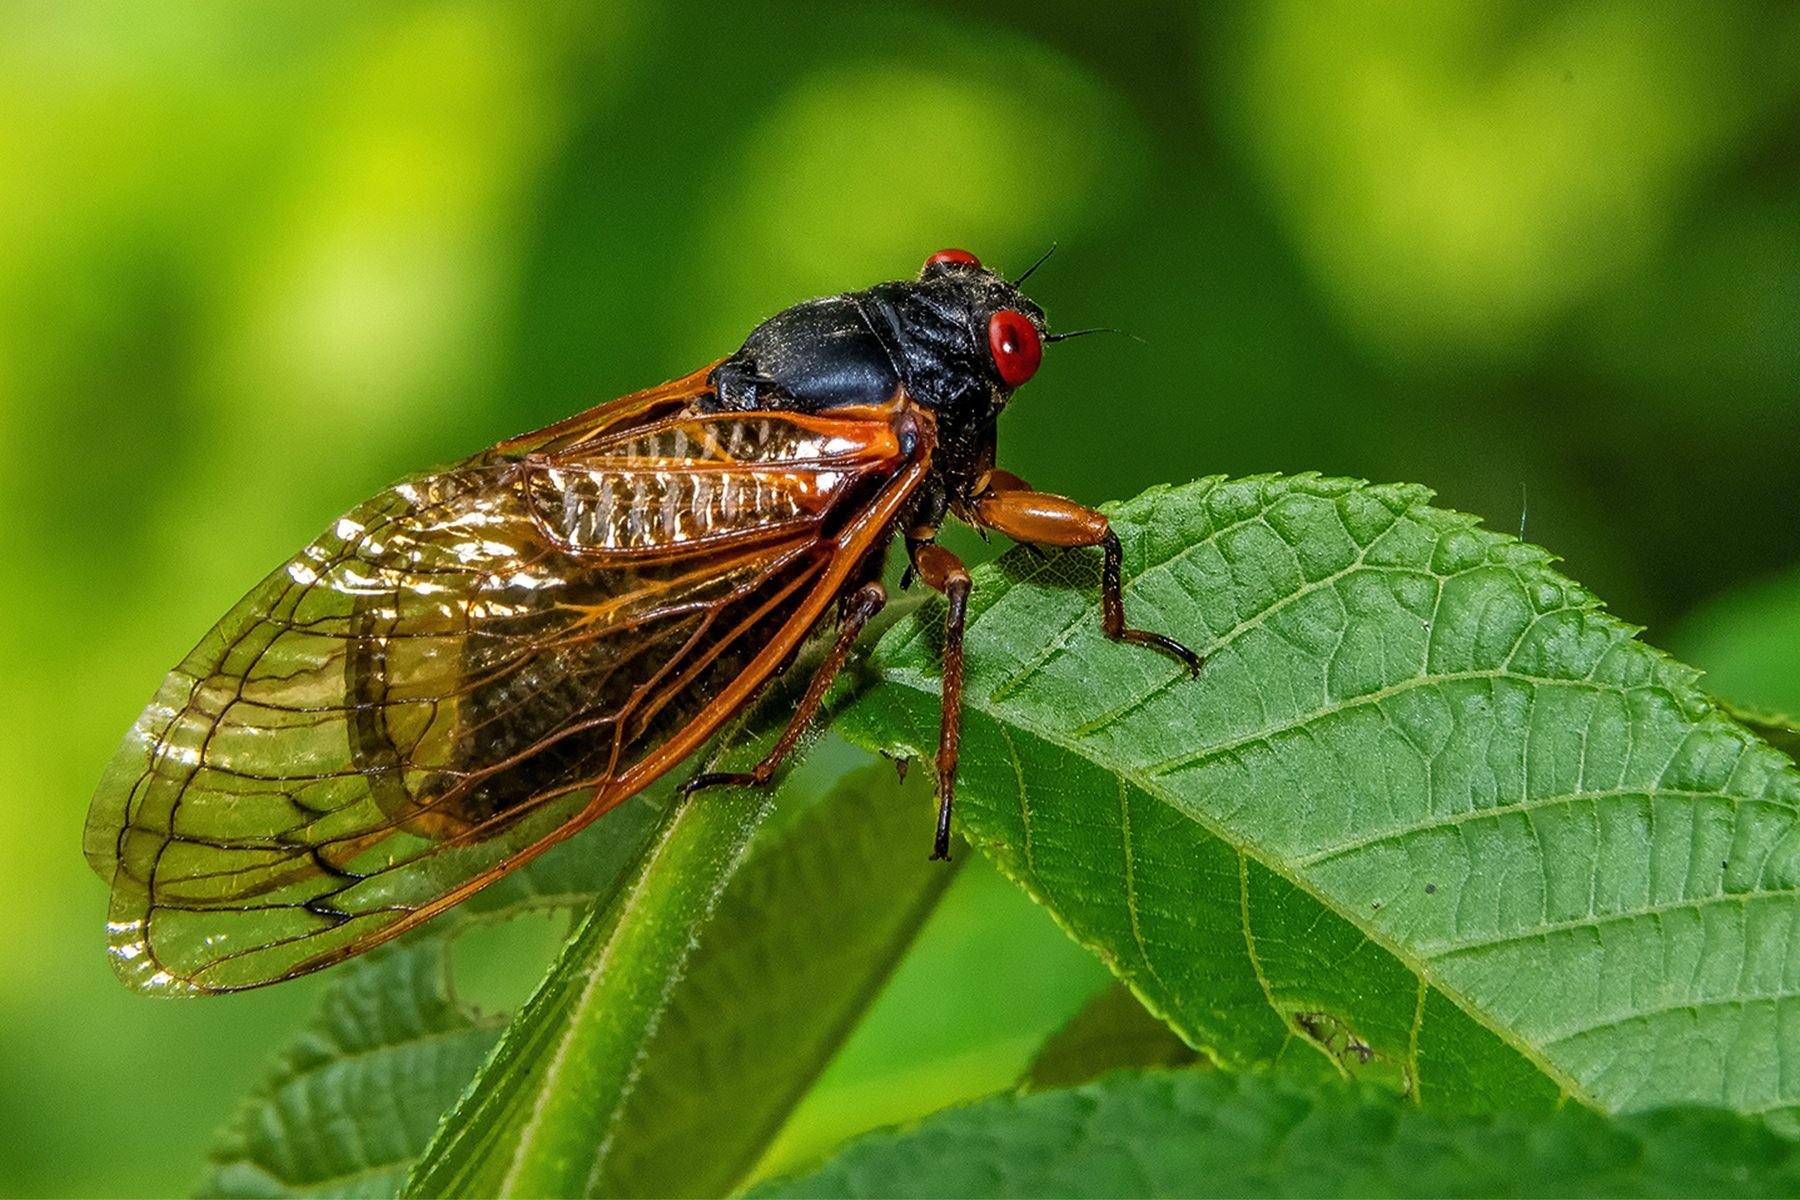 Will the Cicadas Eat Your Plants?